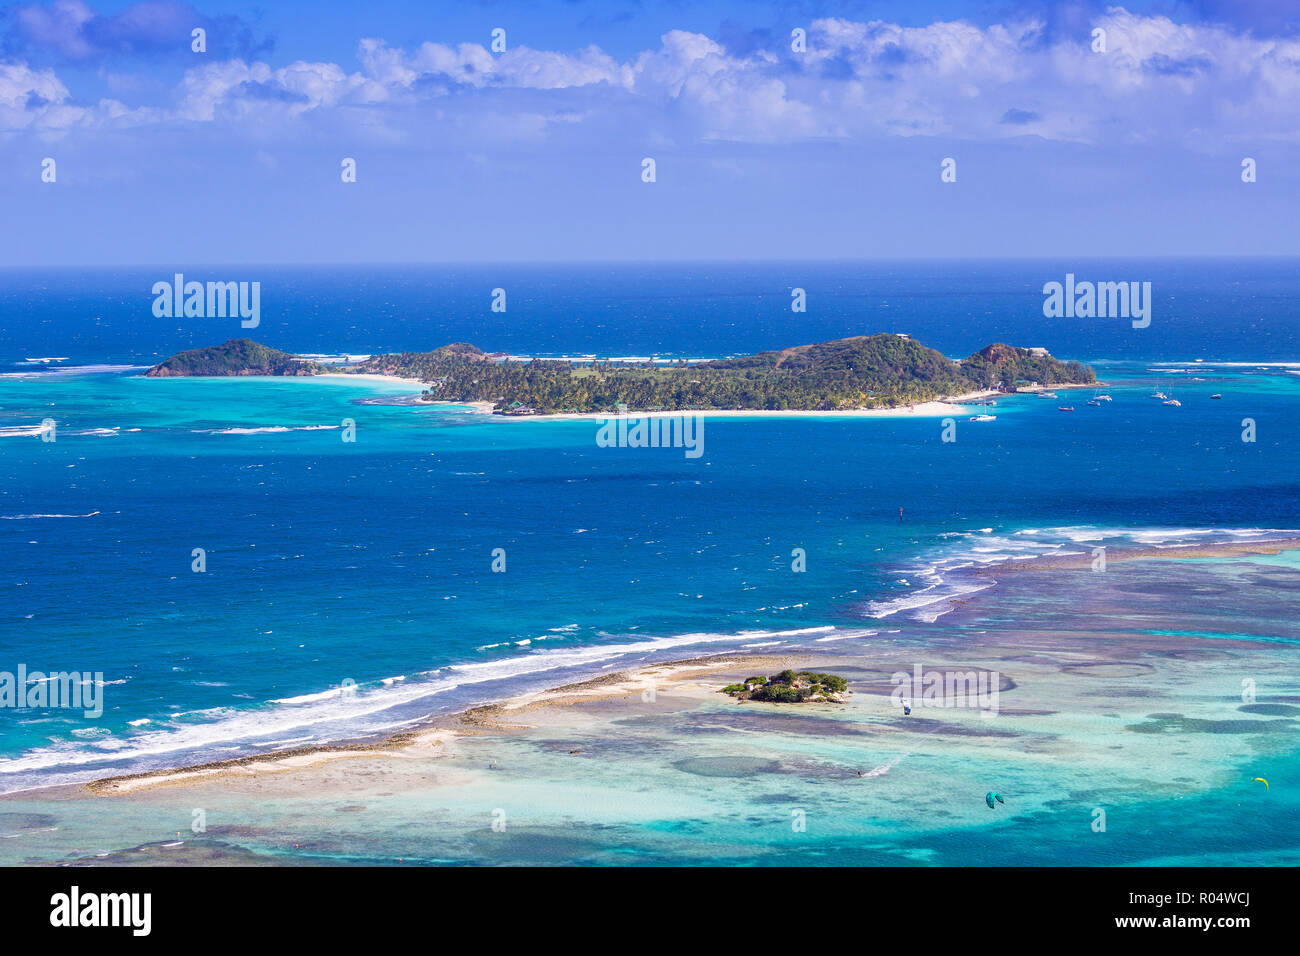 View towards Palm Island, Union Island, The Grenadines, St. Vincent and The Grenadines, West Indies, Caribbean, Central America Stock Photo